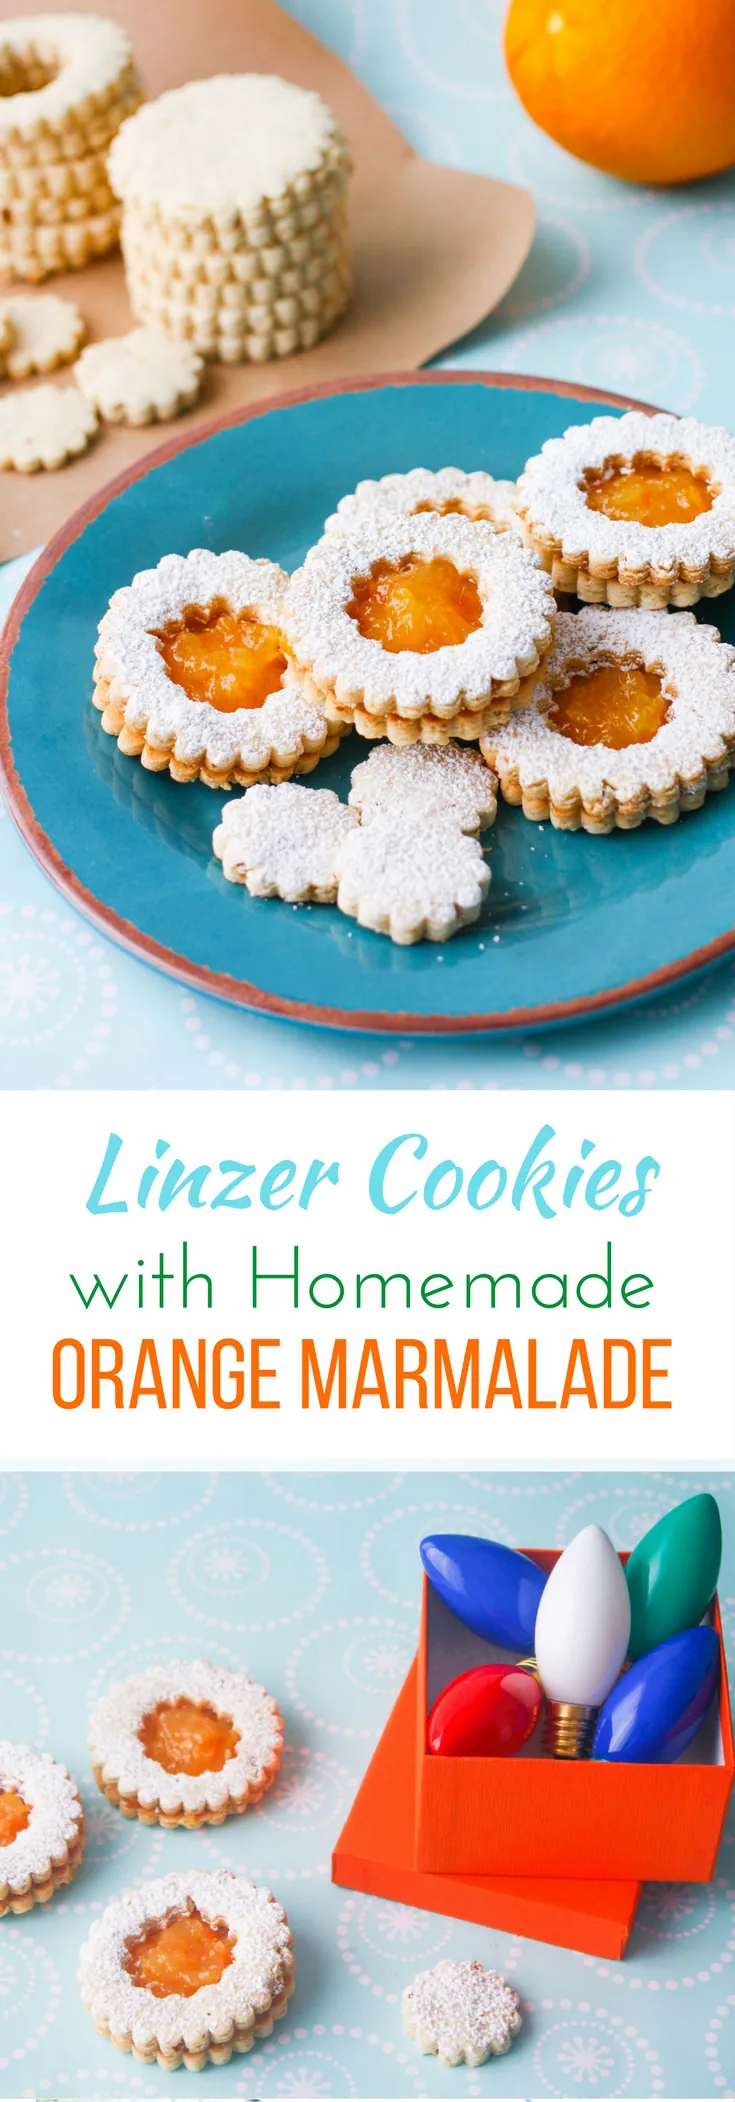 Linzer Cookies with Homemade Orange Marmalade are a fun and tasty treat! These linzer cookies are lovely for the holiday season.